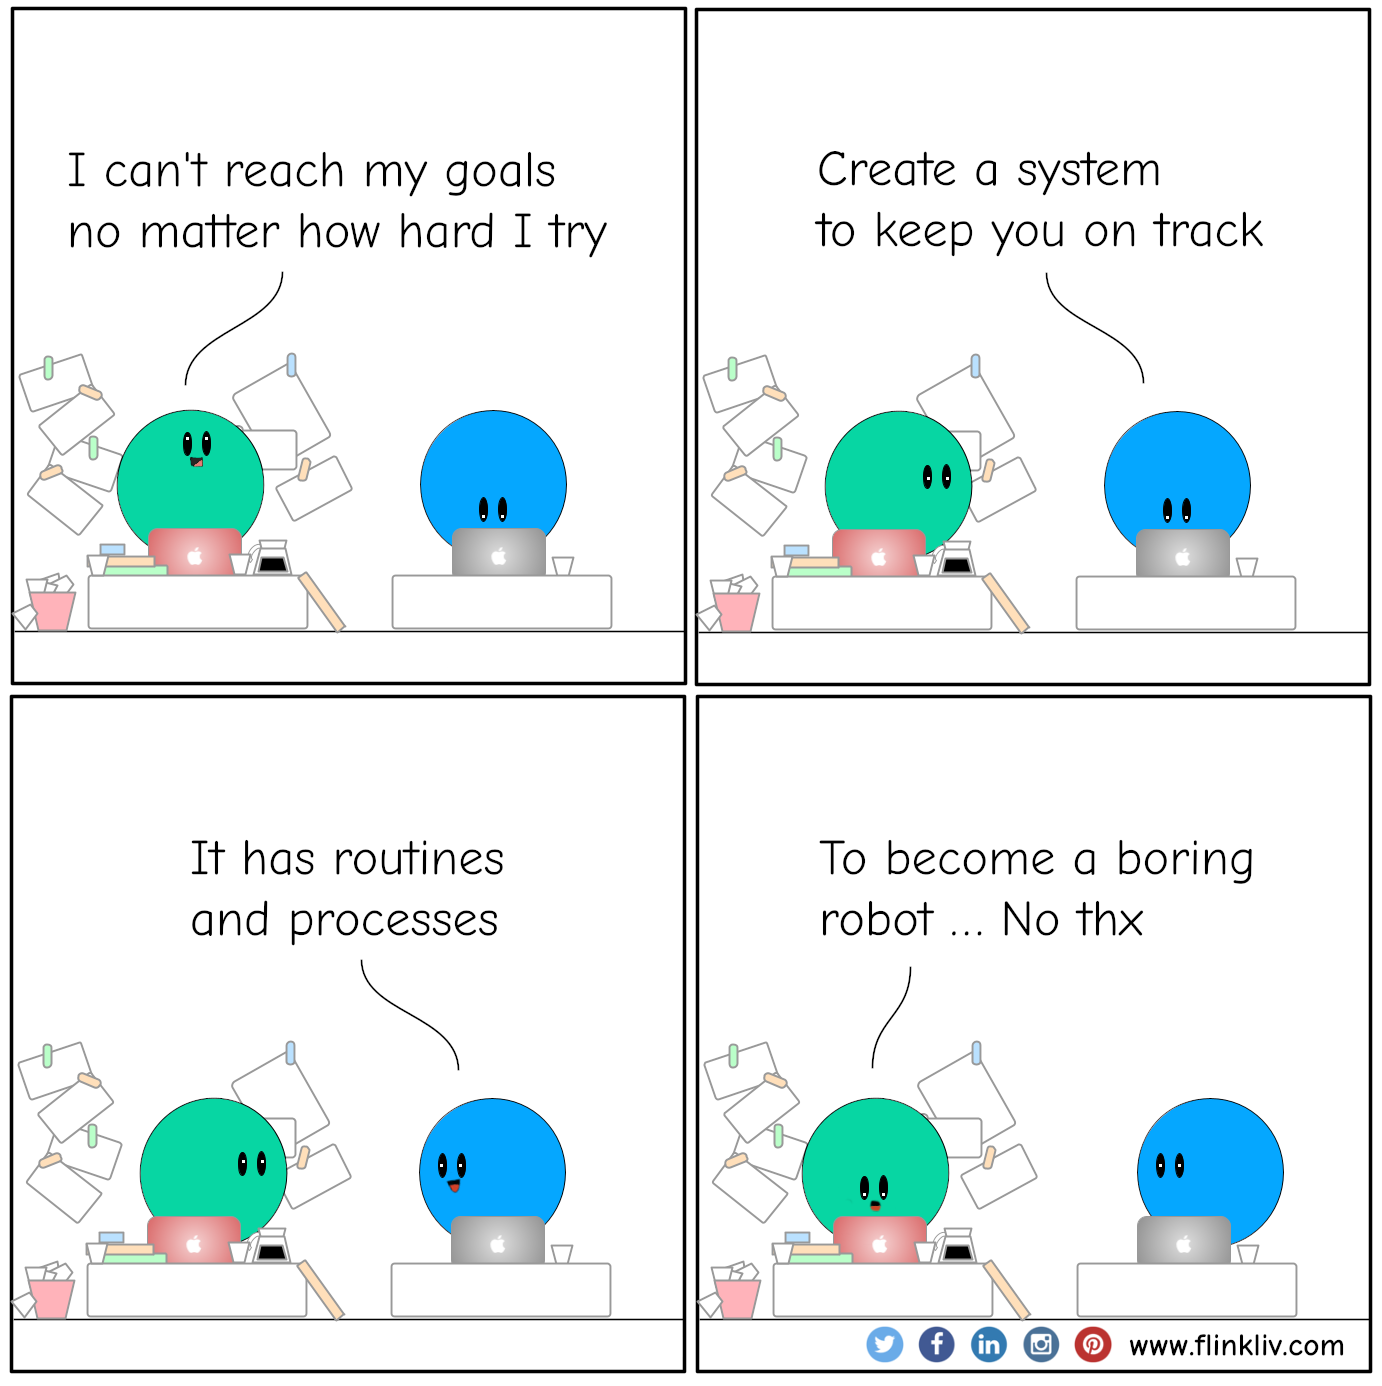 Conversation between A and B about how to get goals done by creating a process. A: I can't reach my goals no matter how hard I try B: Create a system to keep you on track It has routines and processes. A: To become a boring robot. Nah. Beep boop beep. By flinkliv.com